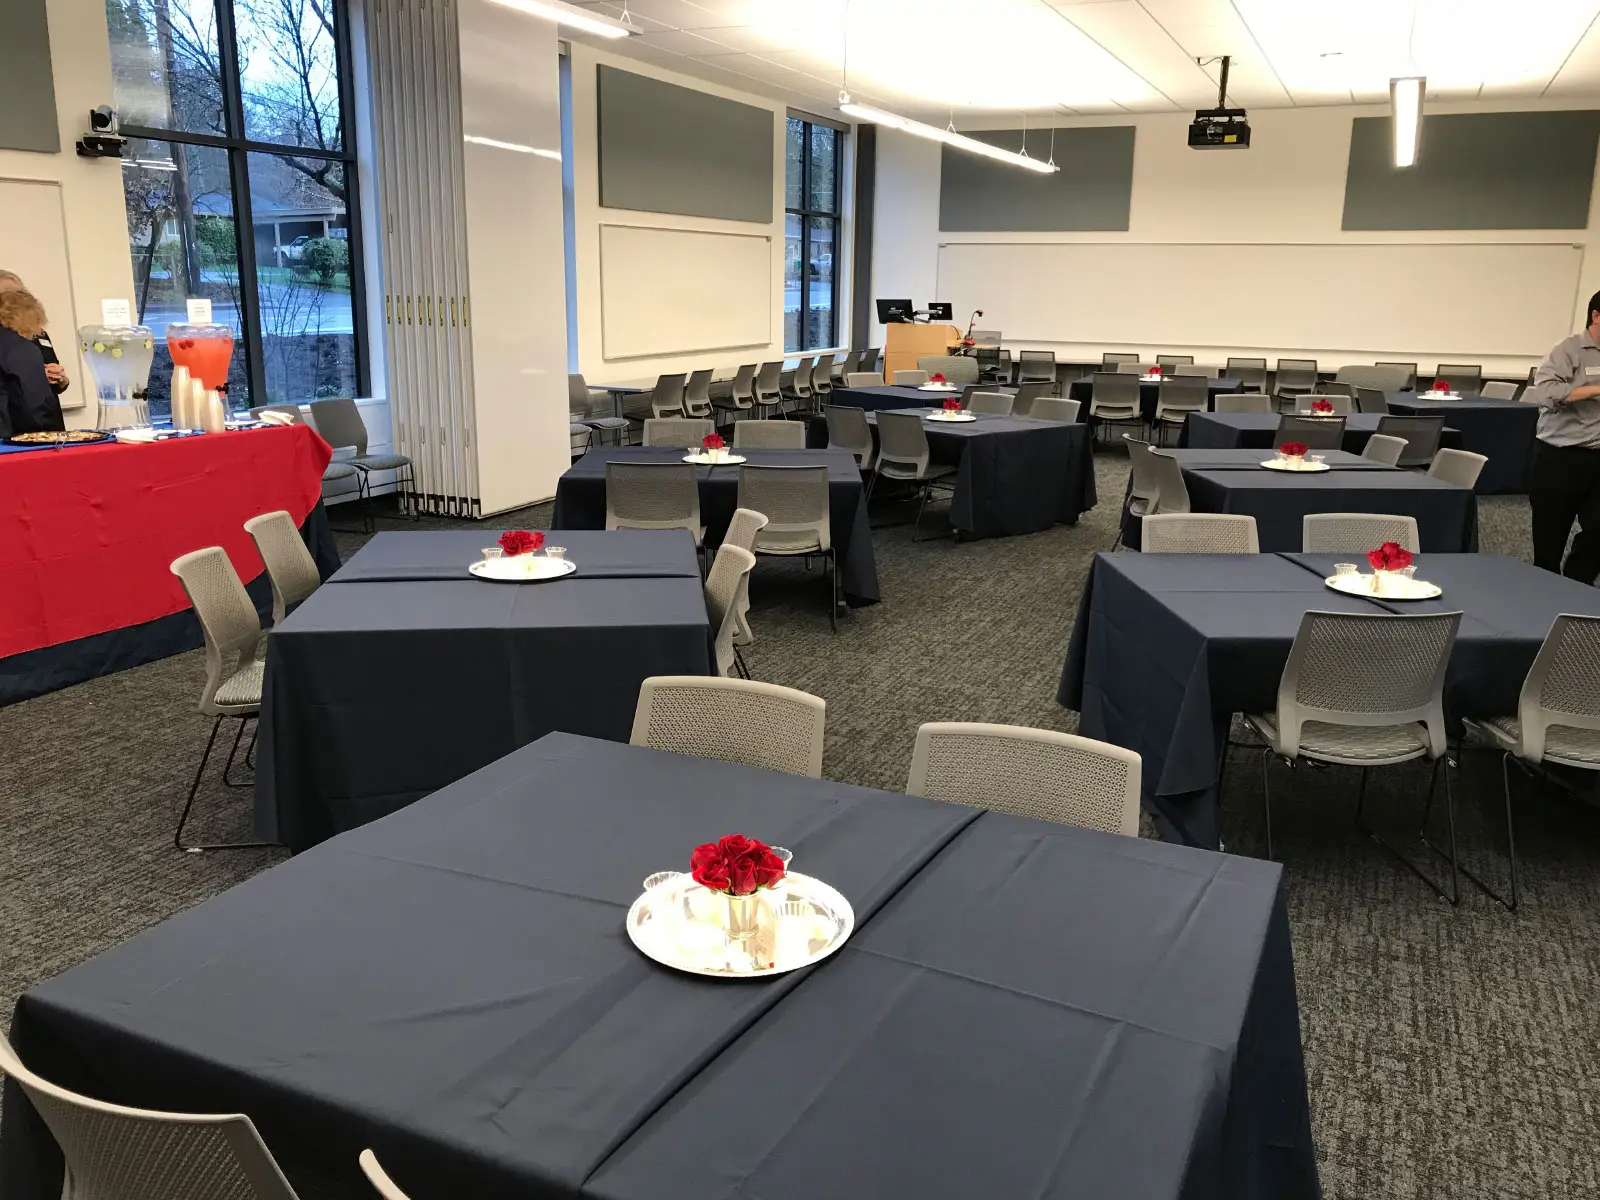 Decorated tables and centerpieces in Harmony Campus community room